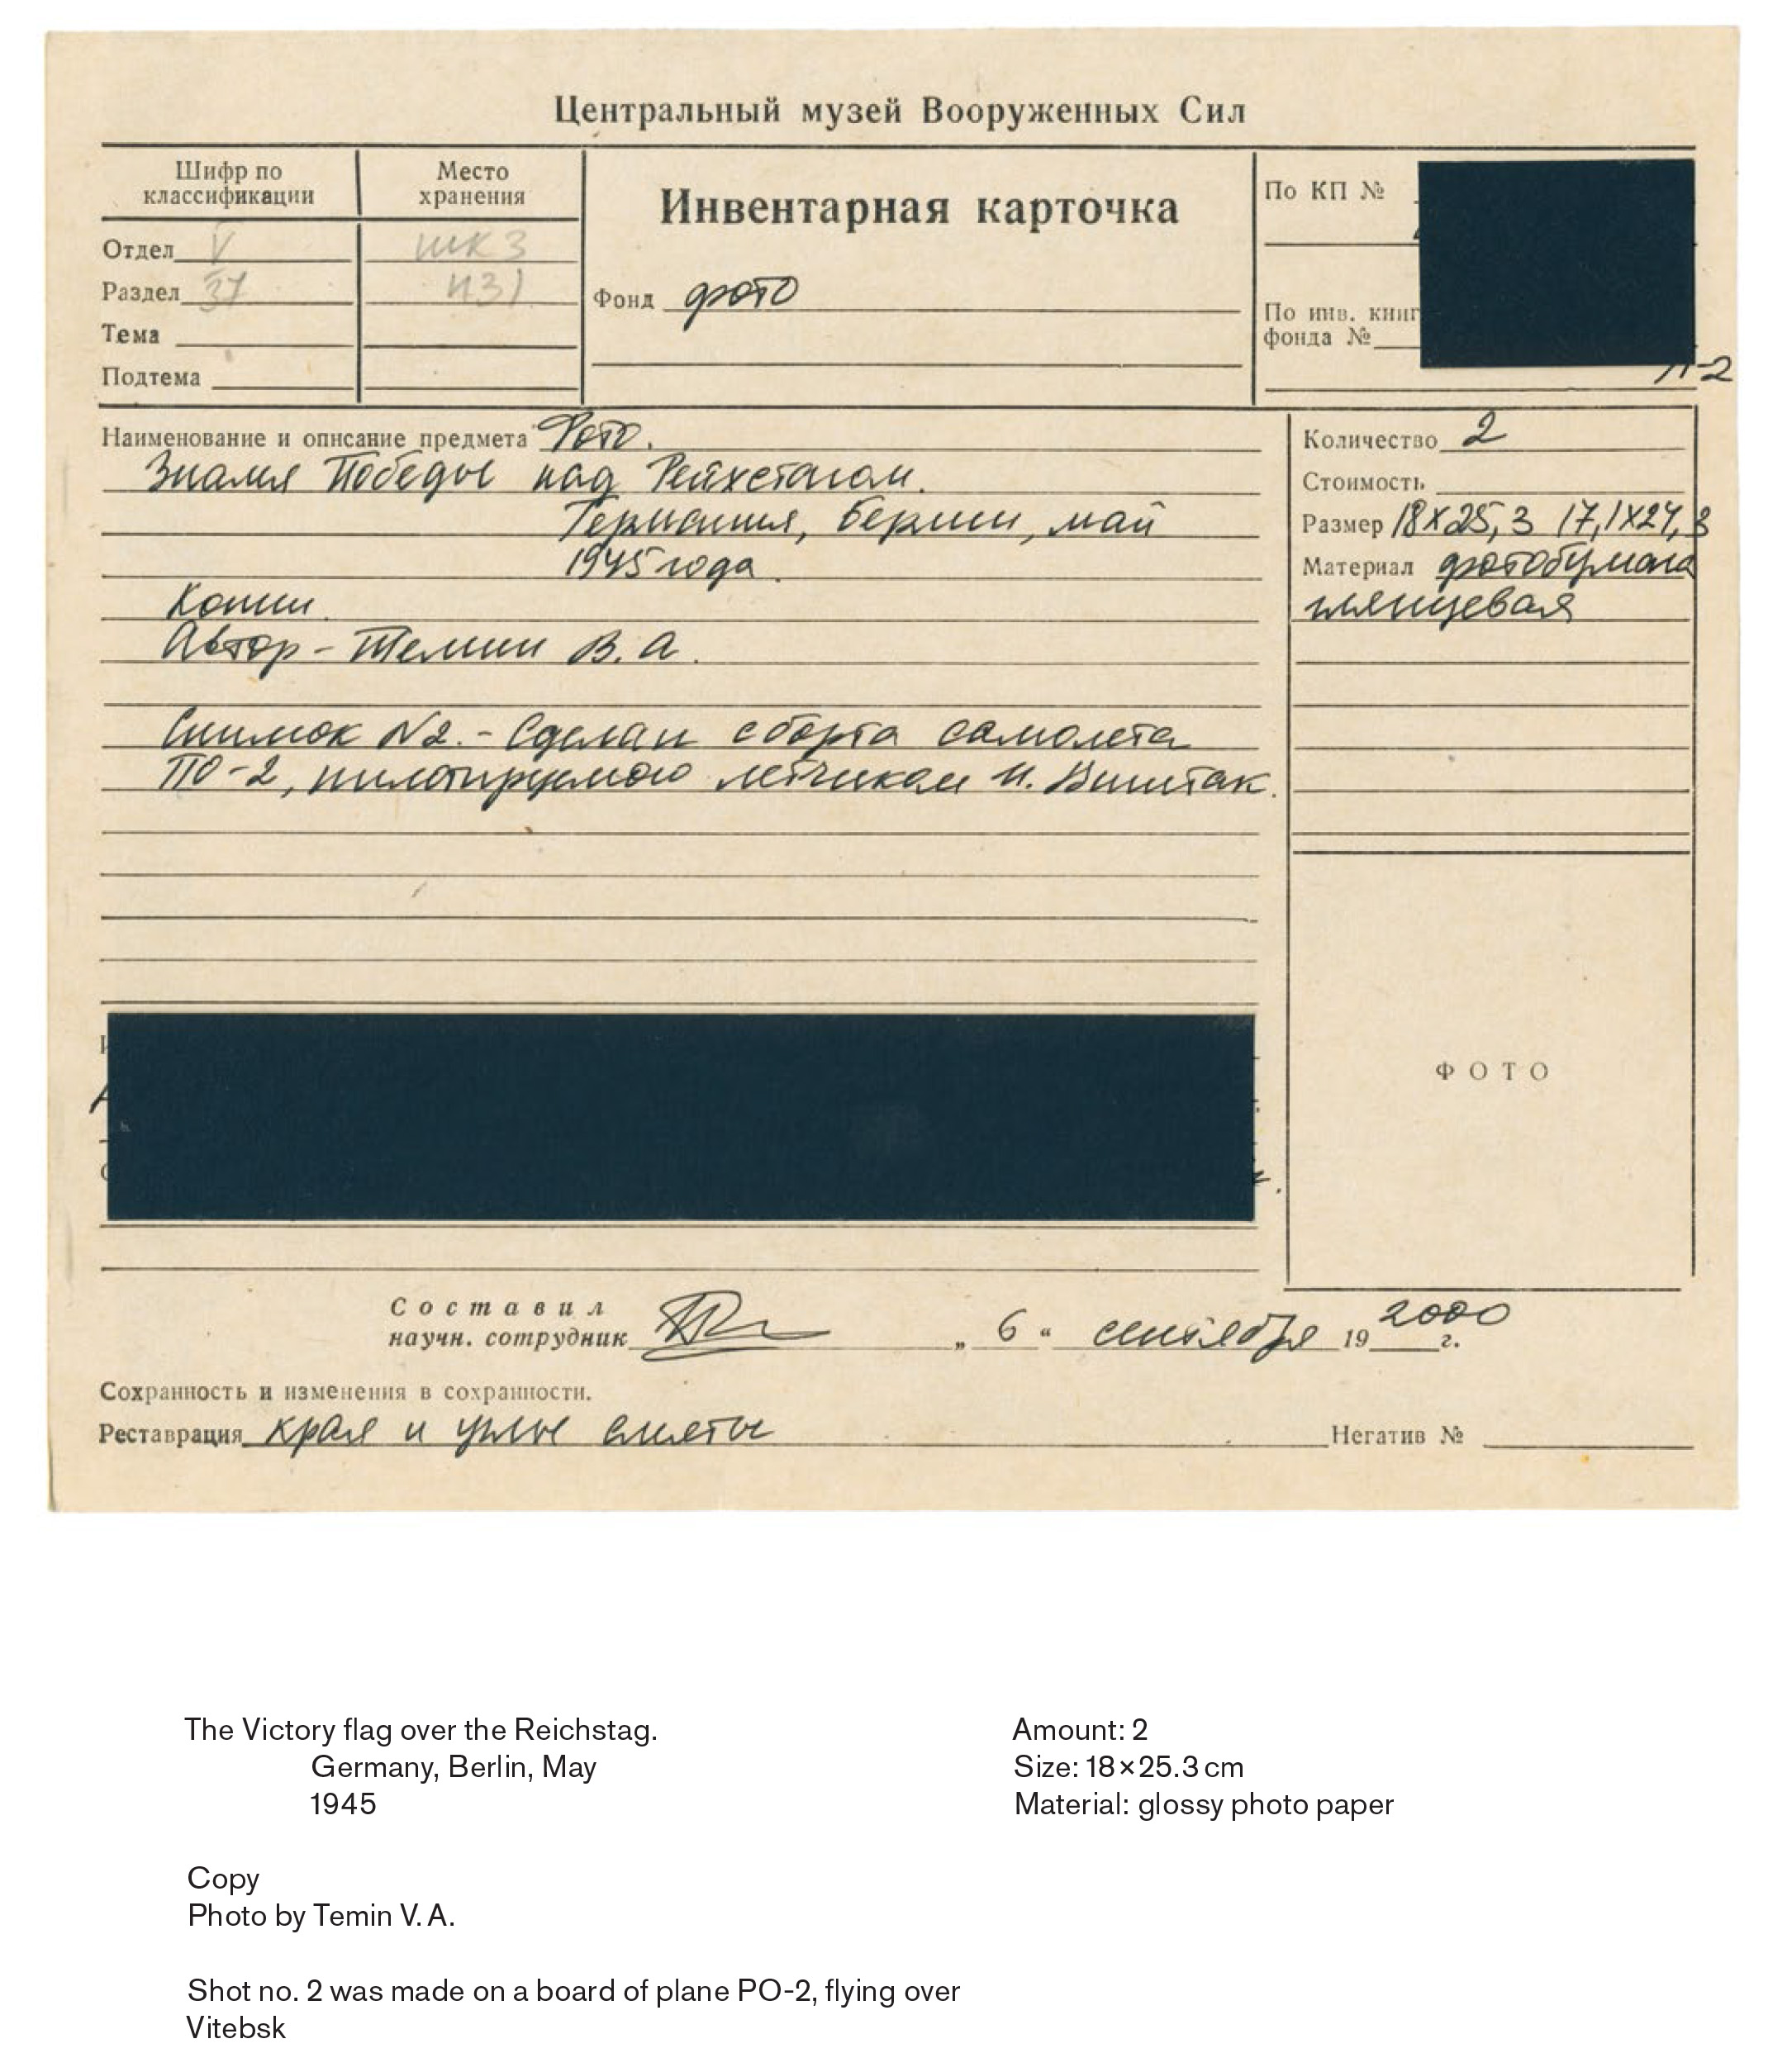 Beyond Visual Range, Inventory Cards, fragment, Armed Forces Museum Moscow, Image courtesy of the artist, 2014.